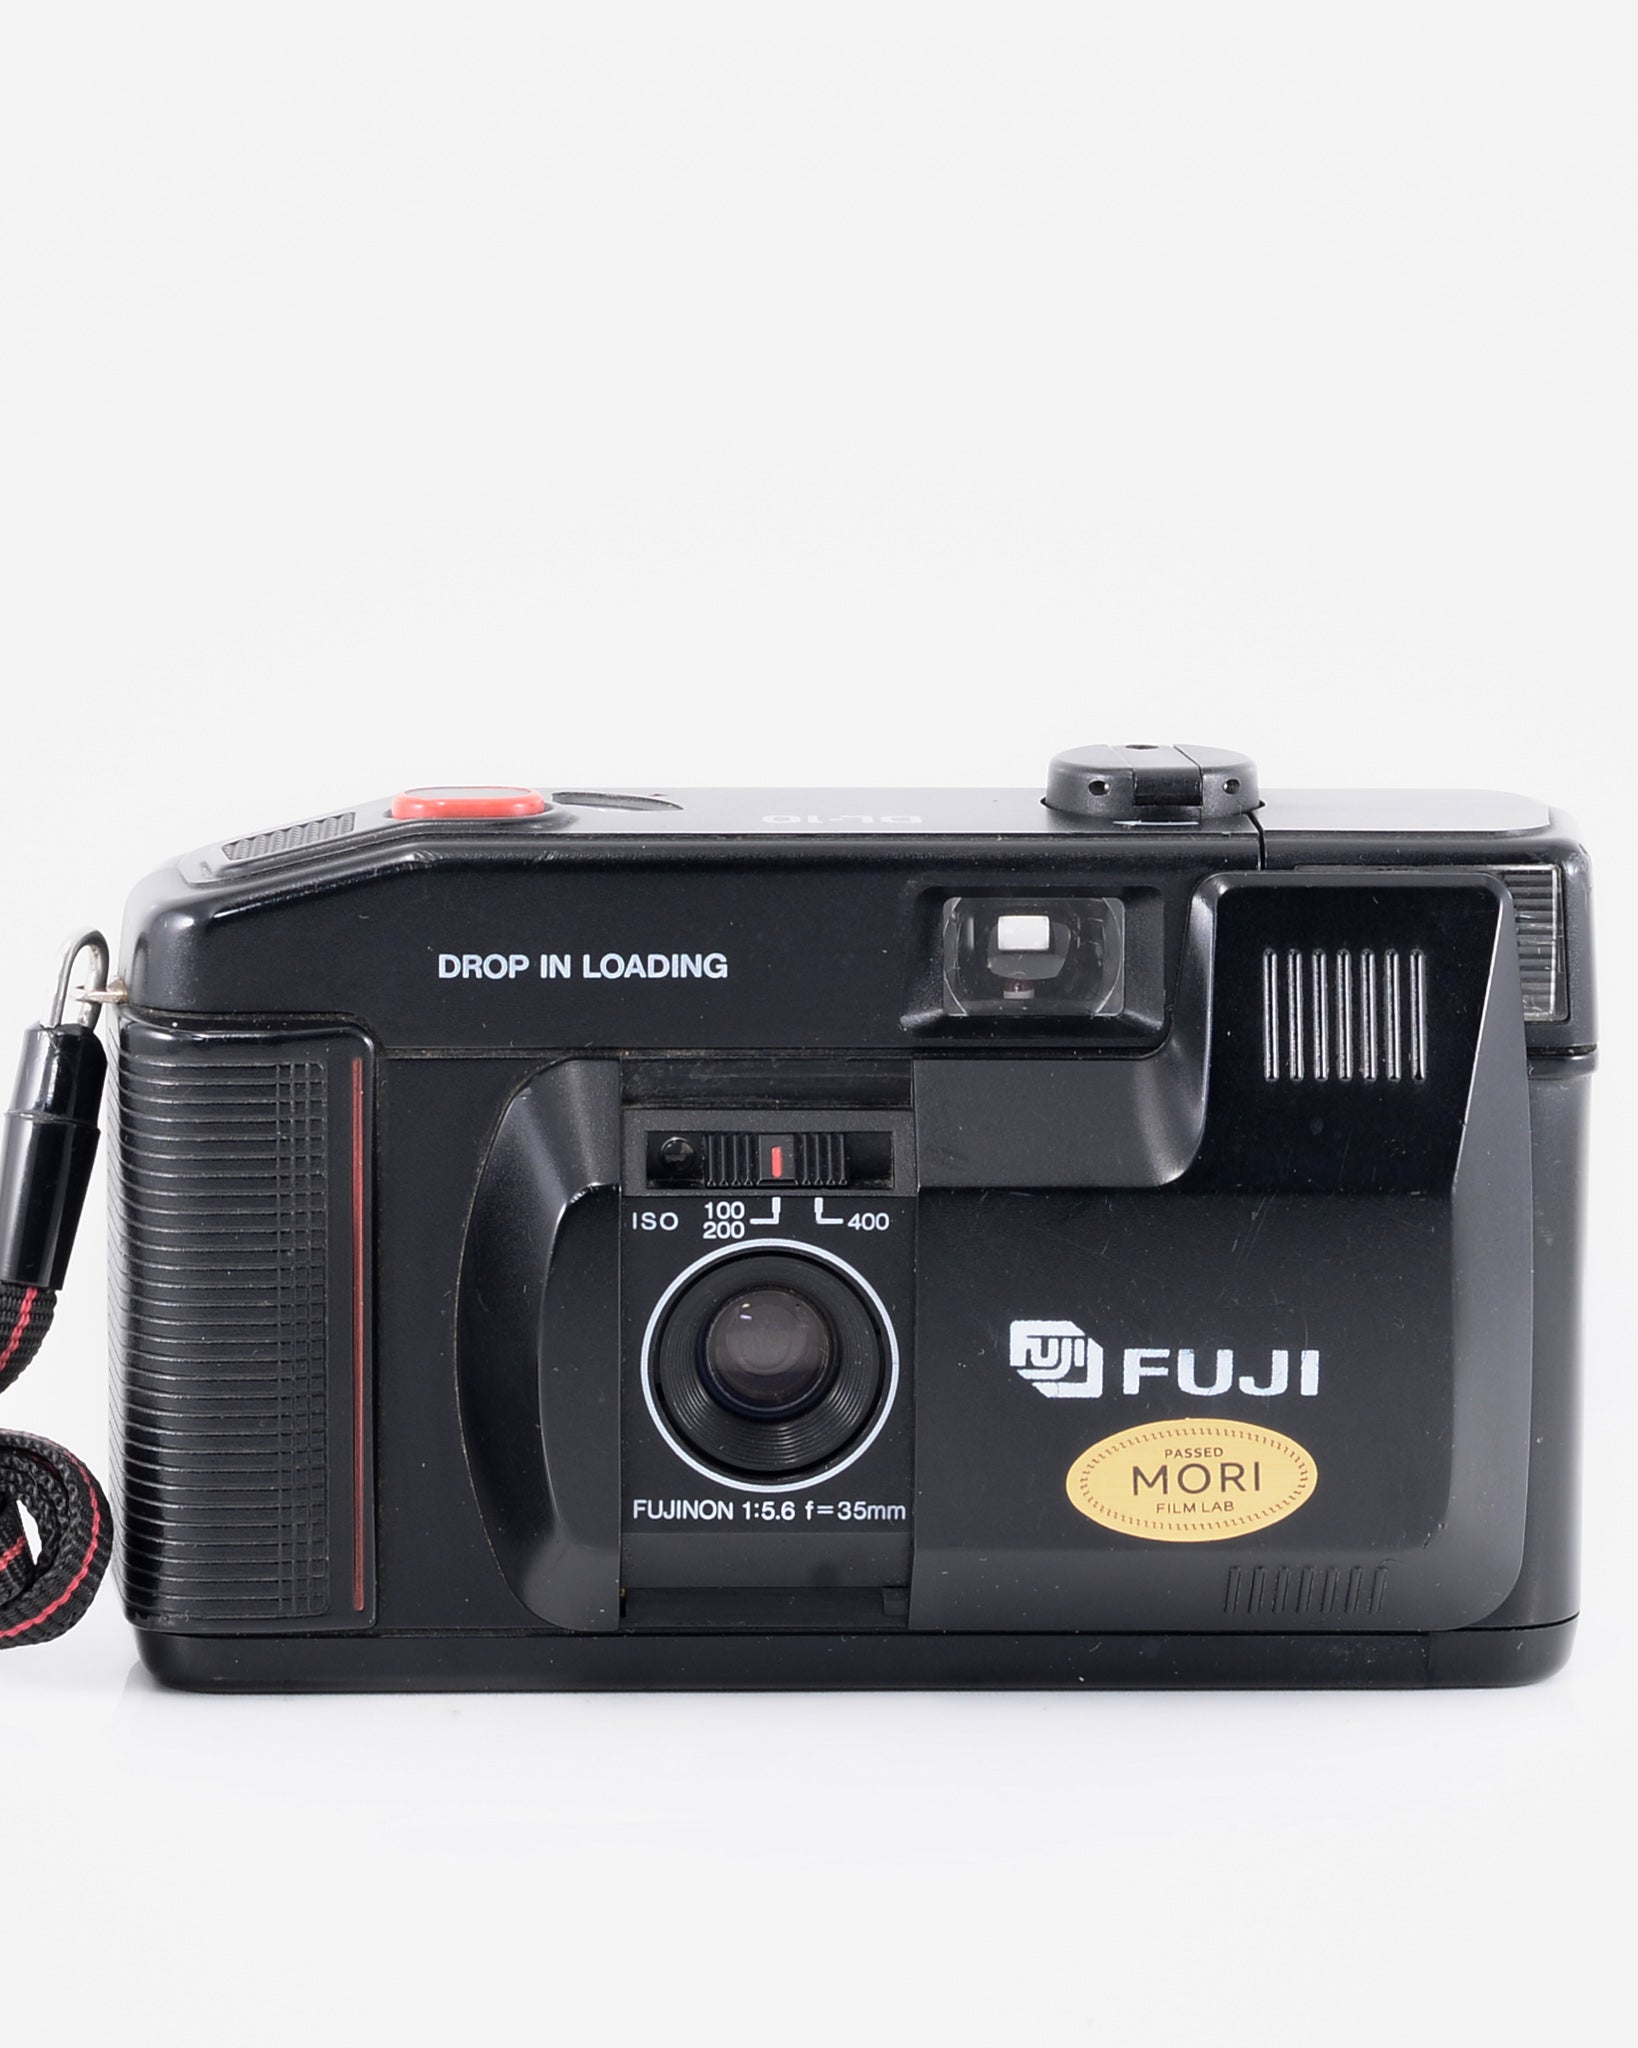 Fuji DL-10 35mm Point And Shoot Film Camera with 35mm Lens